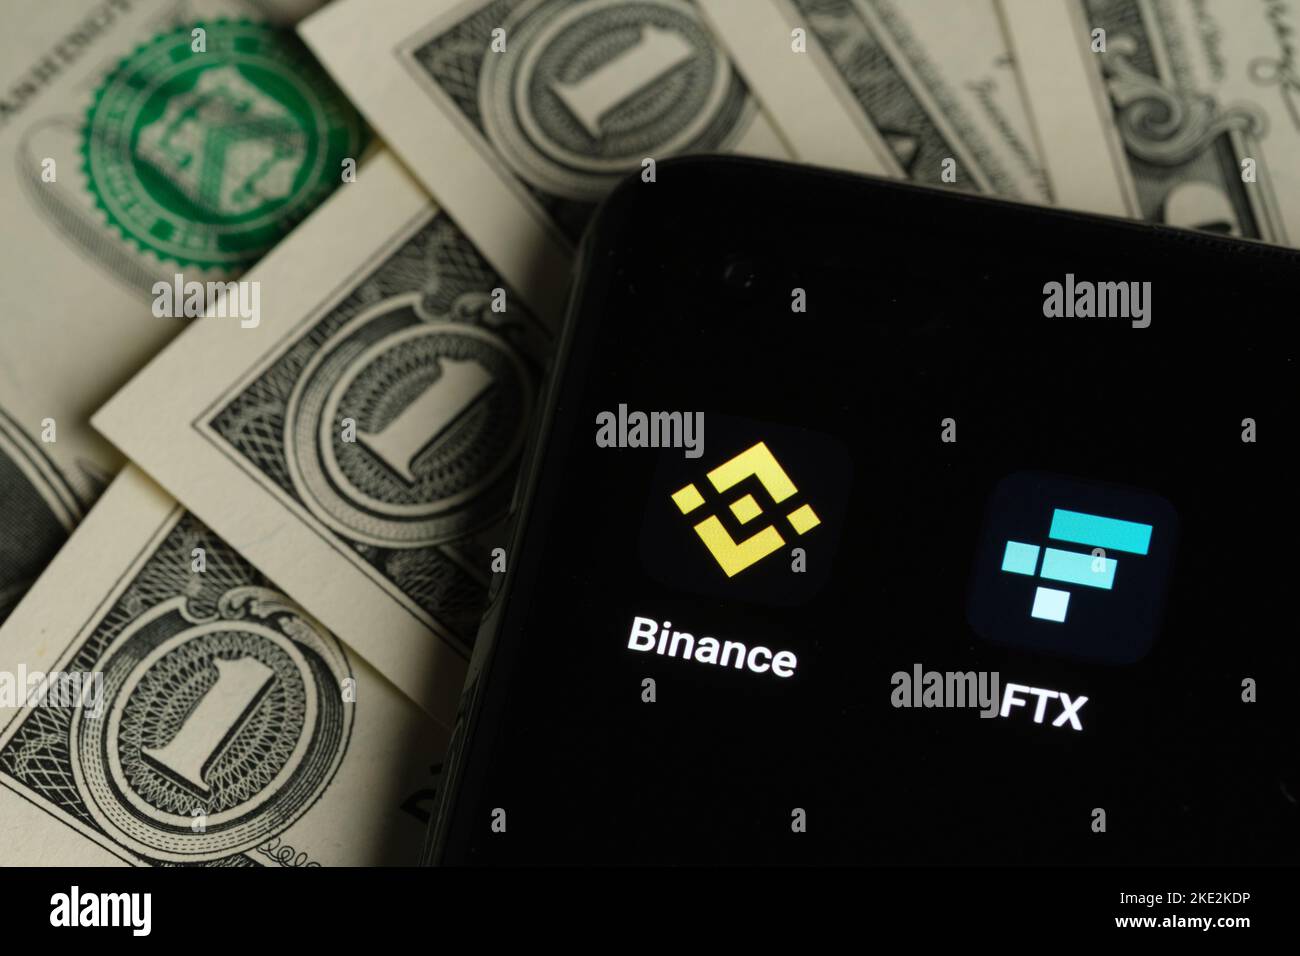 Binance and FTX Cryptocurrency Exchange apps seen on smartphone. Stafford, United Kindom, November 9, 2022. Stock Photo